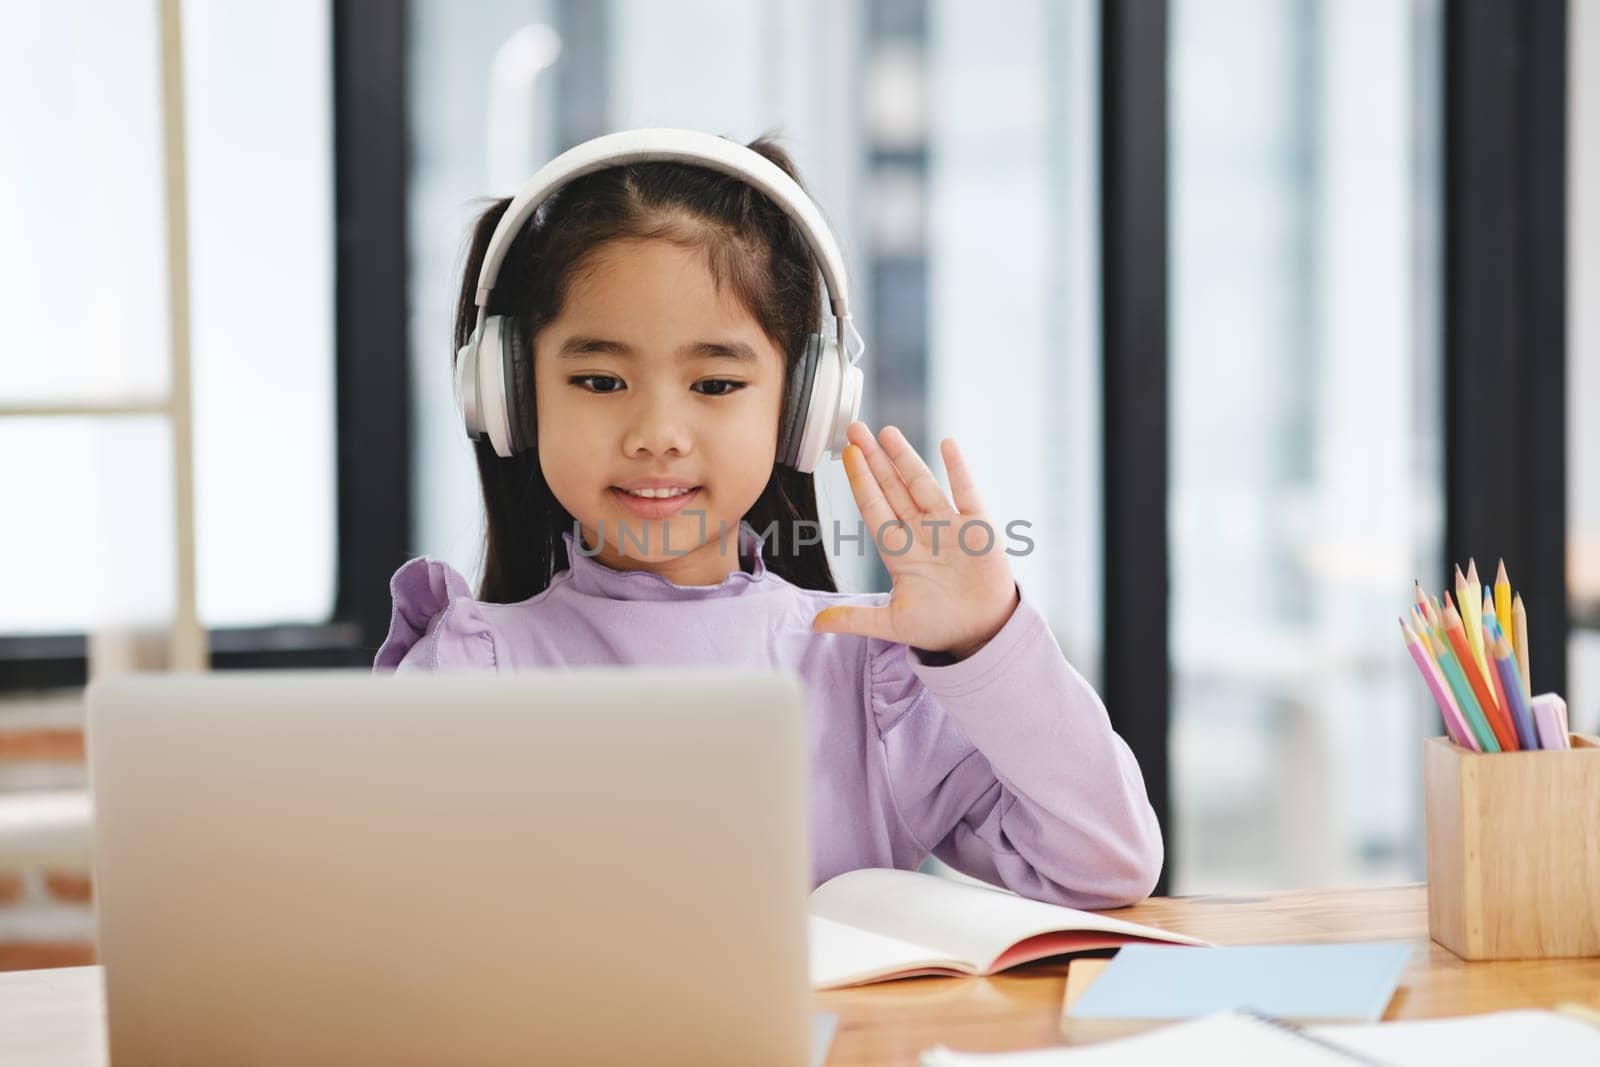 A young girl wearing headphones is waving at the camera while sitting at a desk with a laptop and a book